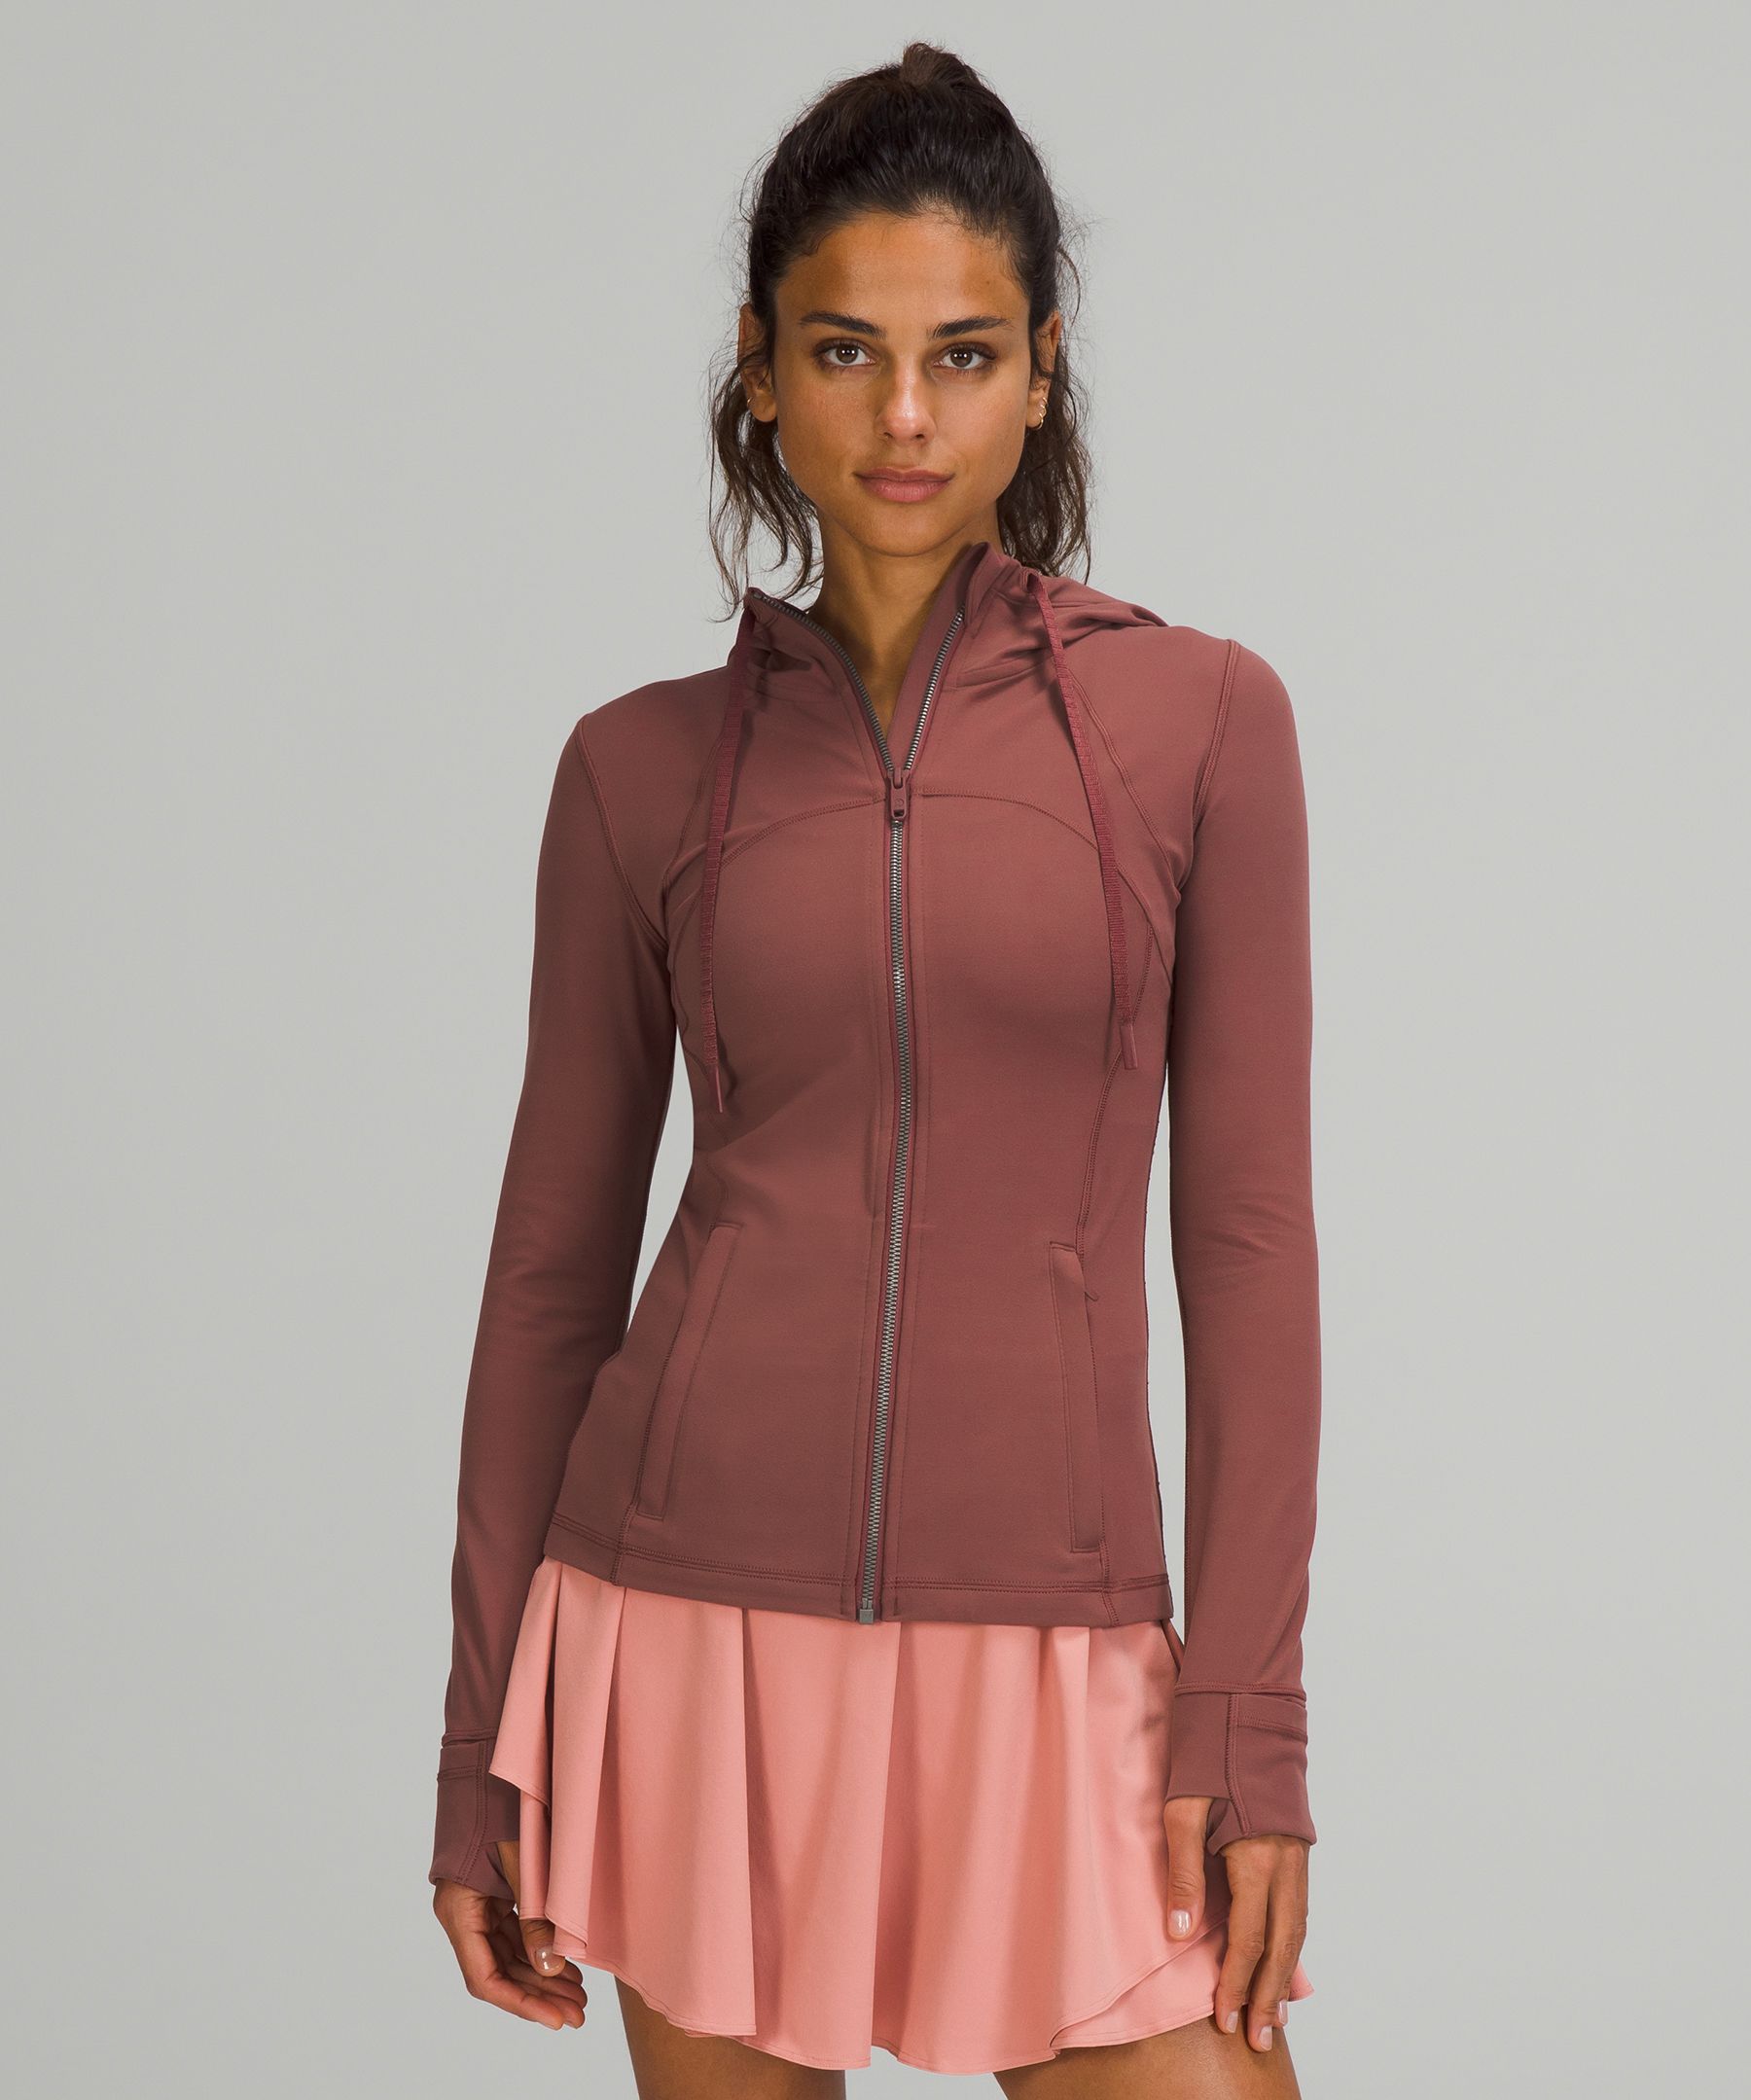 Does anyone have a color comparison of Smoky Red (lululemon) and